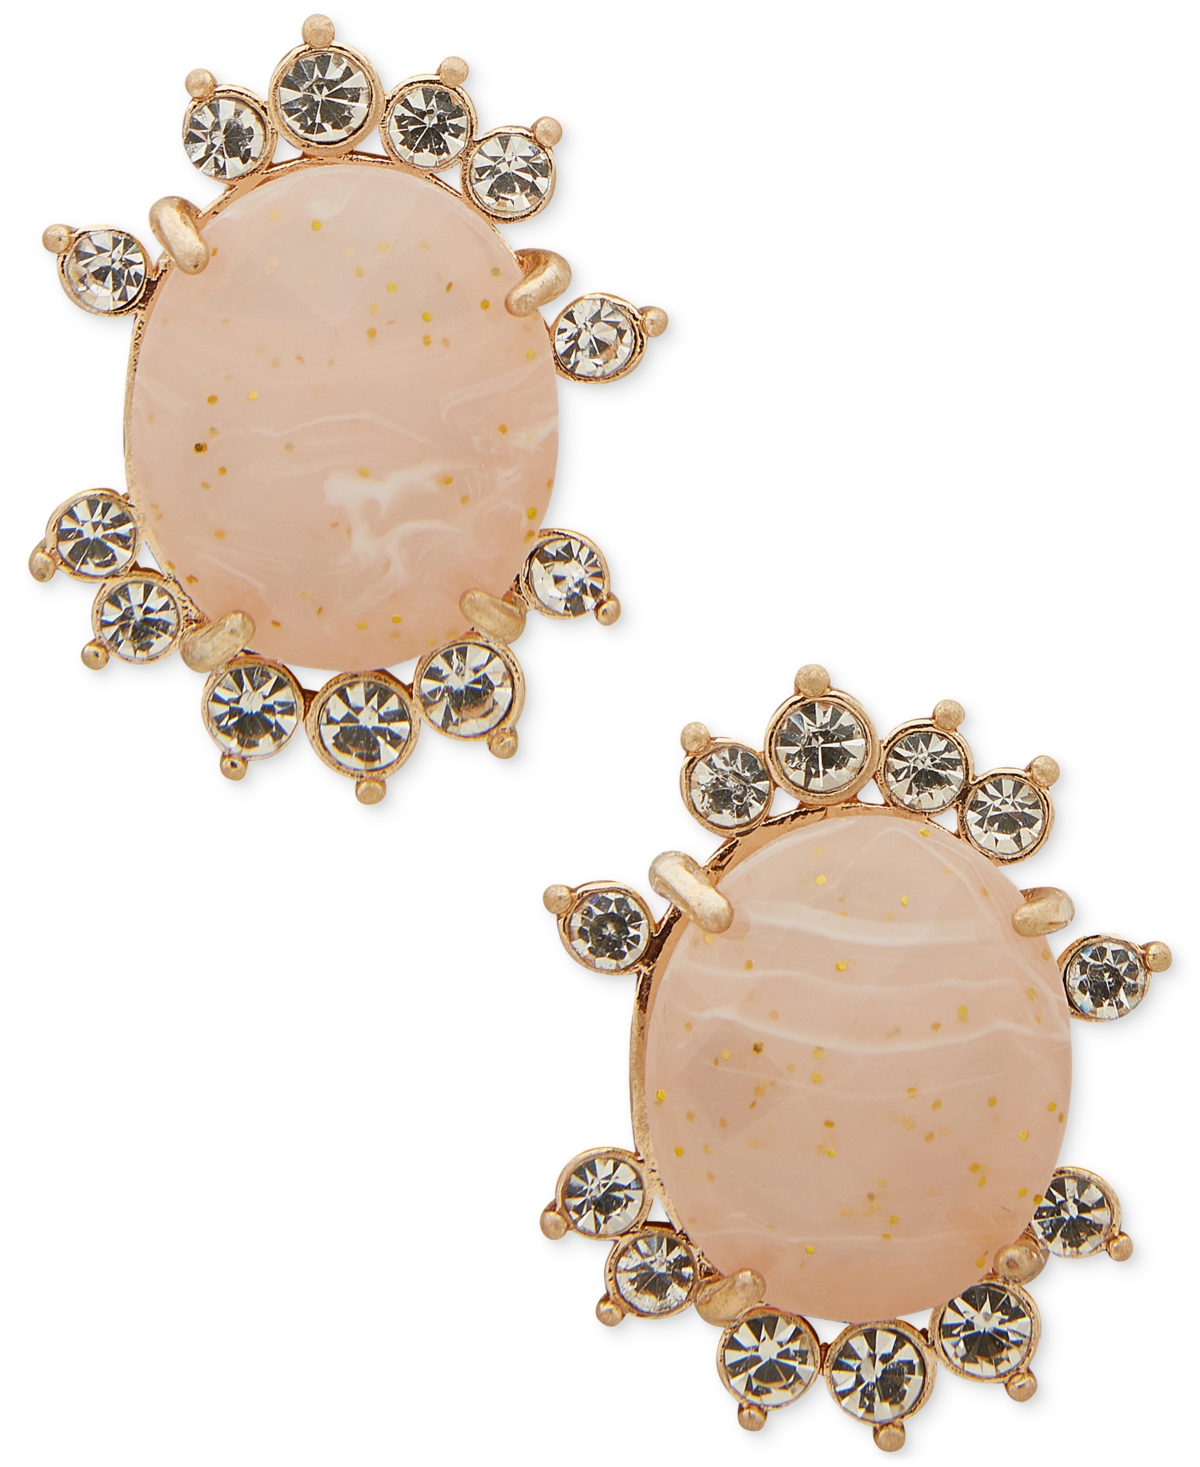 Gold-Tone Pave Crackled Stone Stud Earrings - Blush